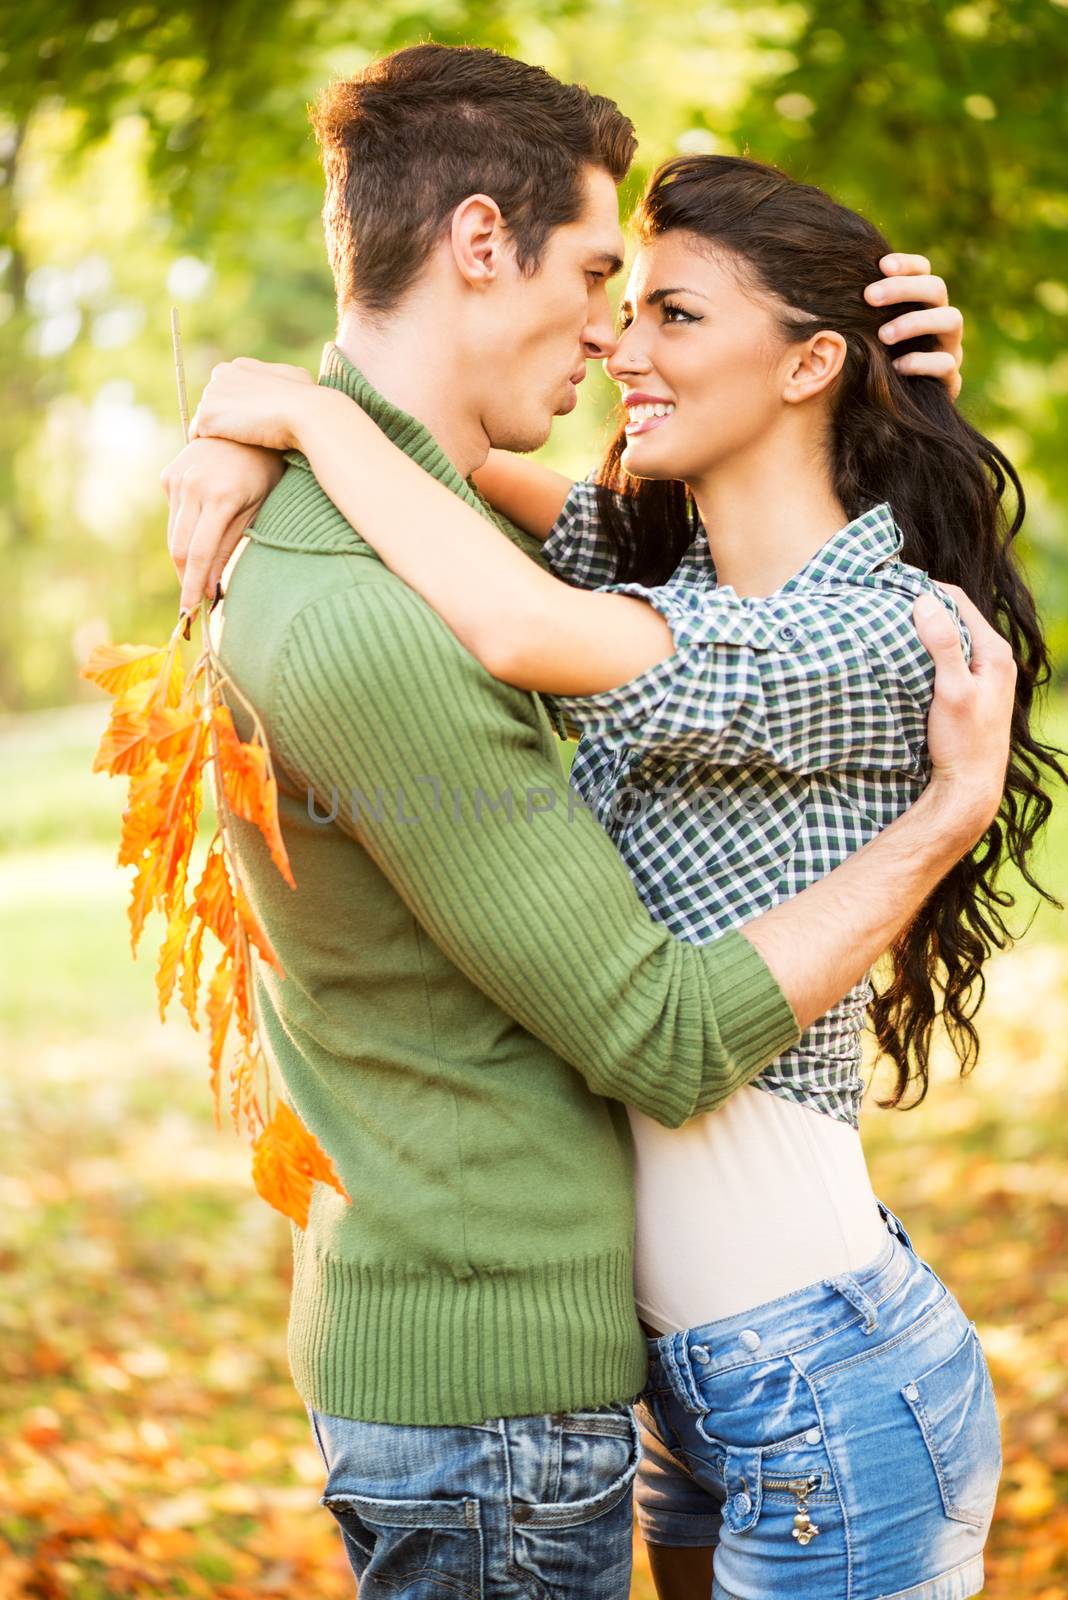 Young heterosexual couple embracing standing in the park.